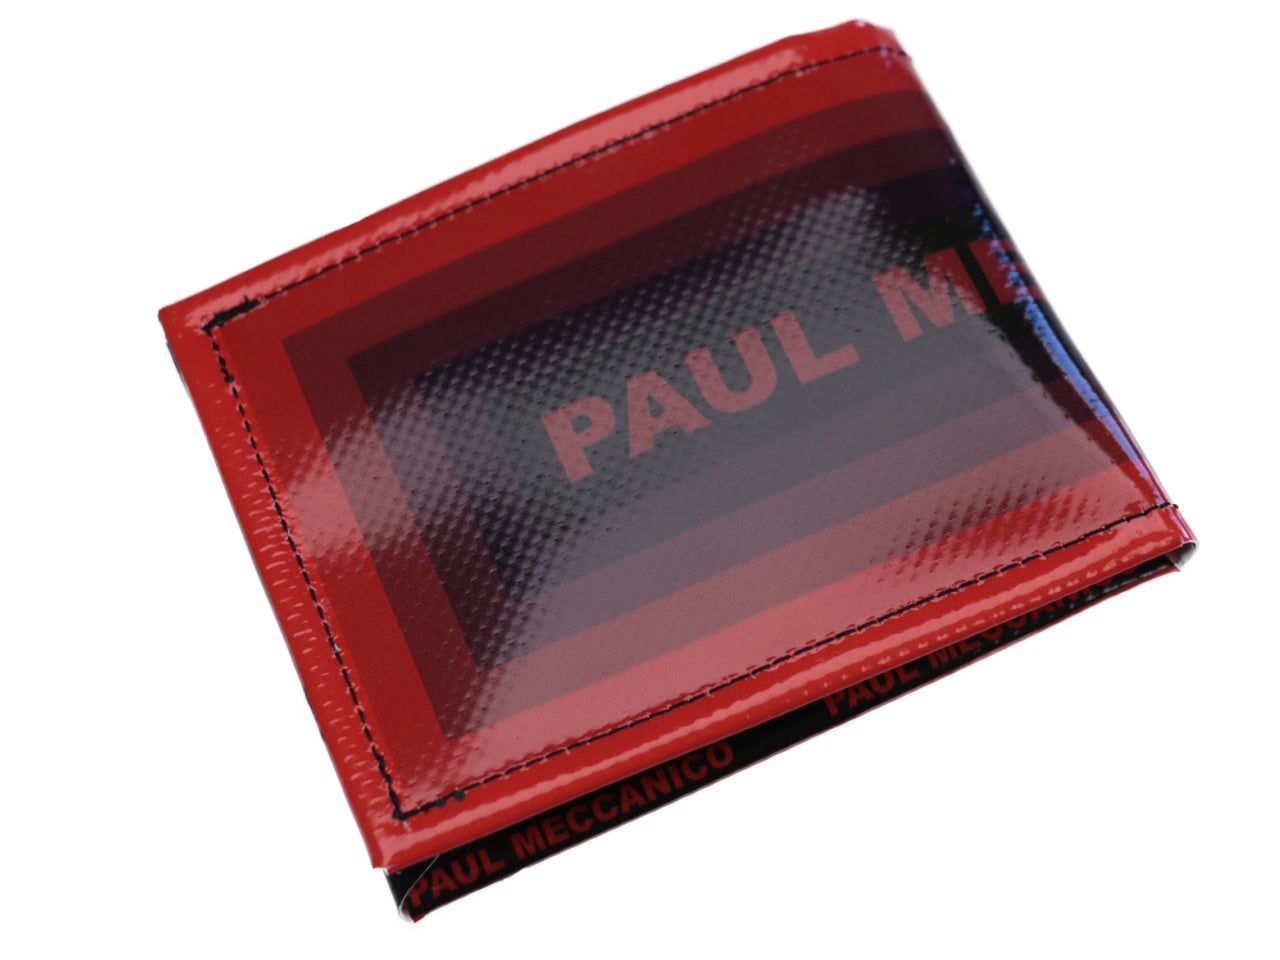 MEN'S WALLET RED. MODEL CRIK MADE OF LORRY TARPAULIN. - Limited Edition Paul Meccanico